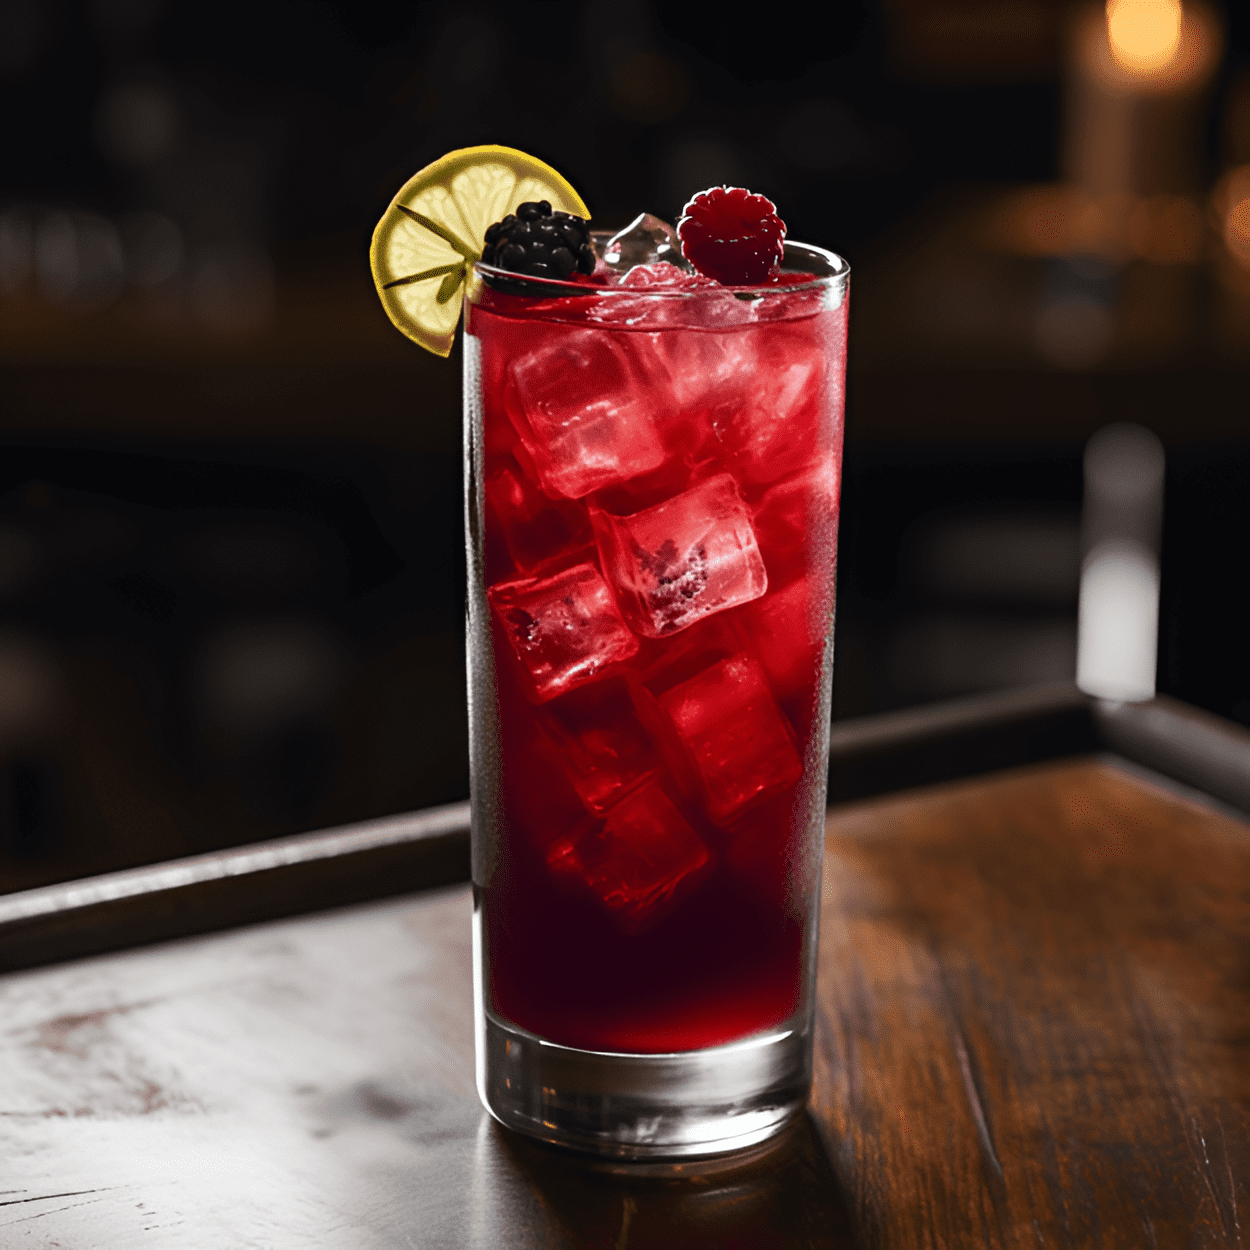 Batman Cocktail Recipe - The Batman cocktail is a sweet, fruity, and slightly tart drink. The combination of blackcurrant liqueur and cranberry juice gives it a rich, berry flavor, while the lemon juice adds a hint of tartness. The vodka provides a strong, smooth base that balances out the sweetness.